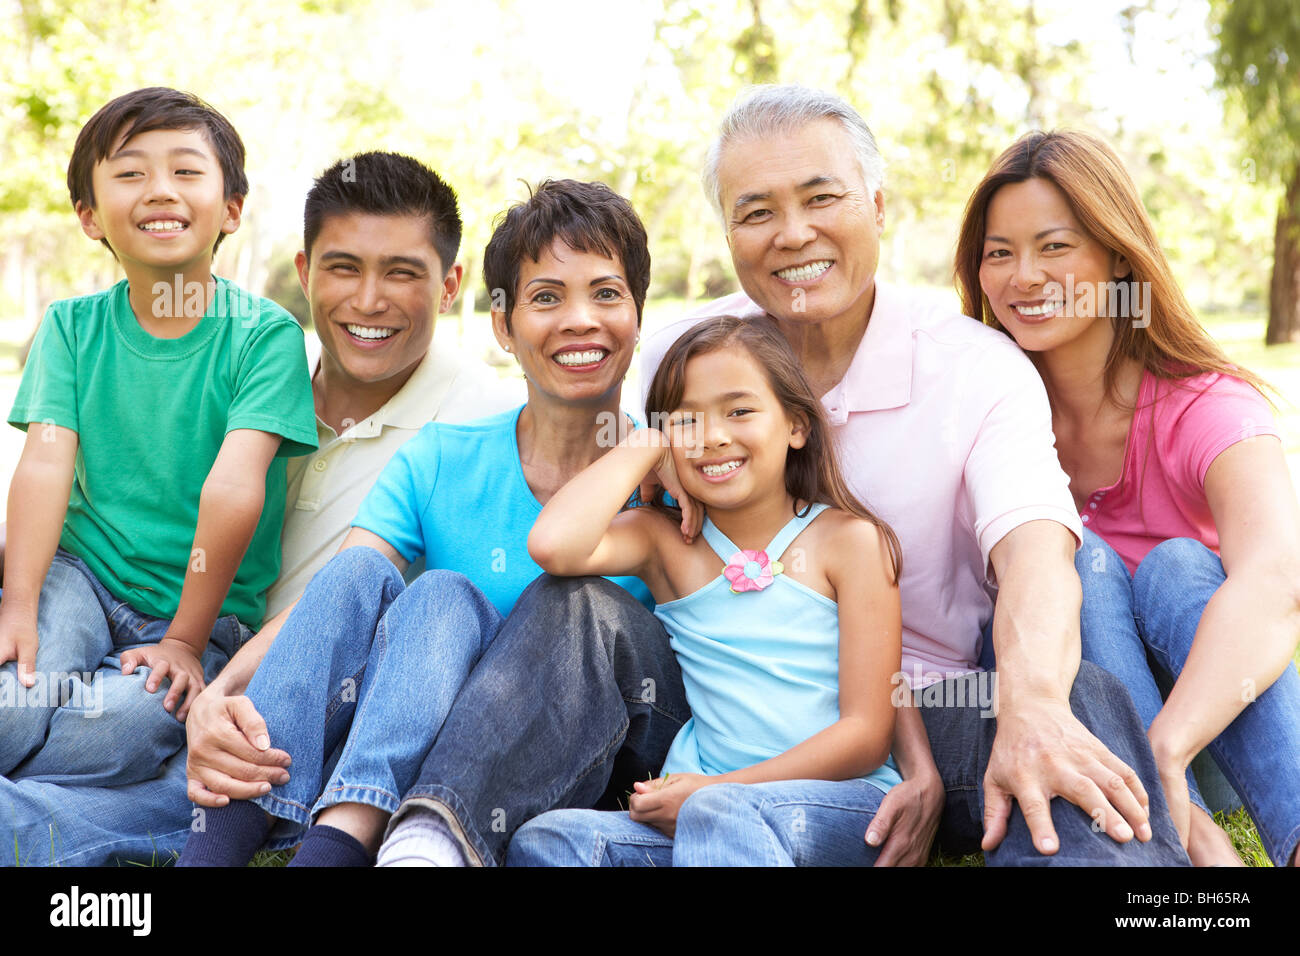 Portrait Of Extended Family Group In Park Stock Photo